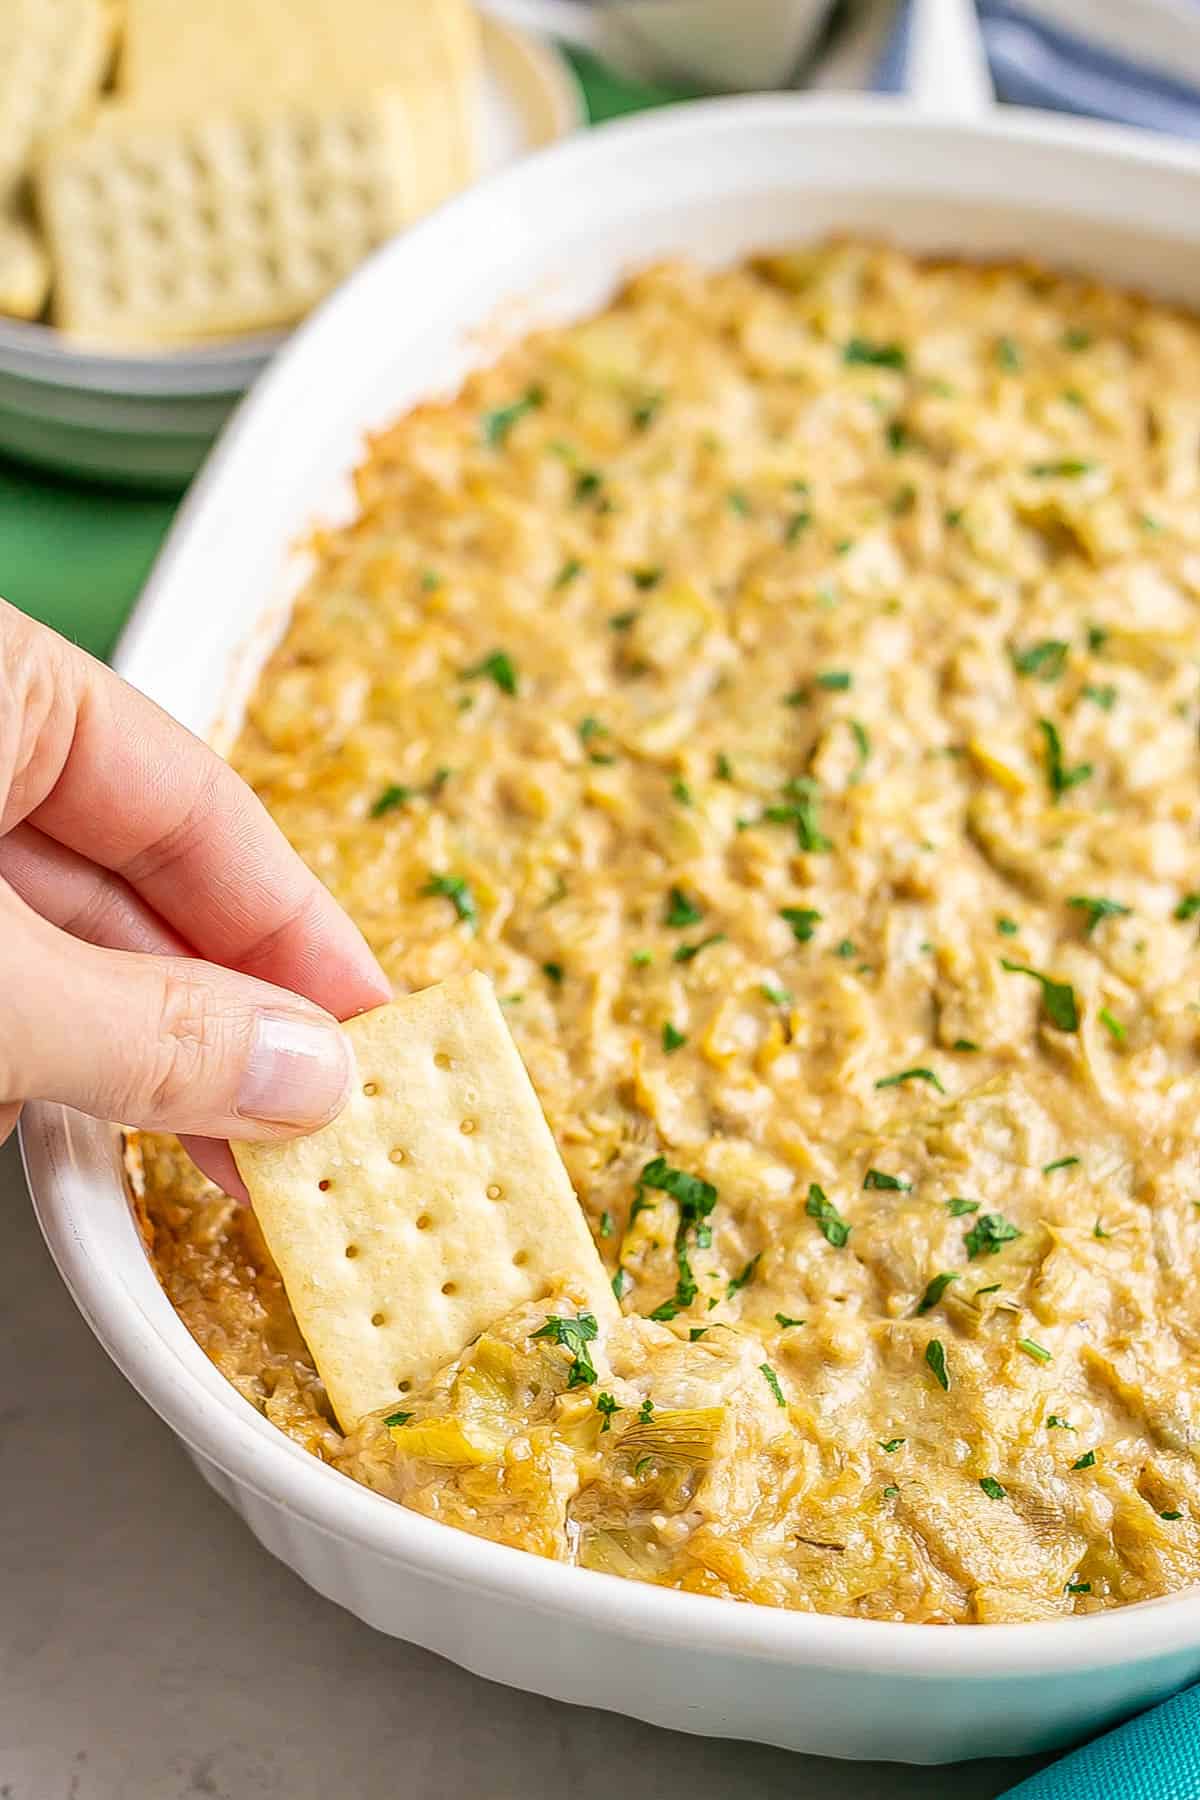 A cracker scooping up artichoke dip from a white casserole dish.